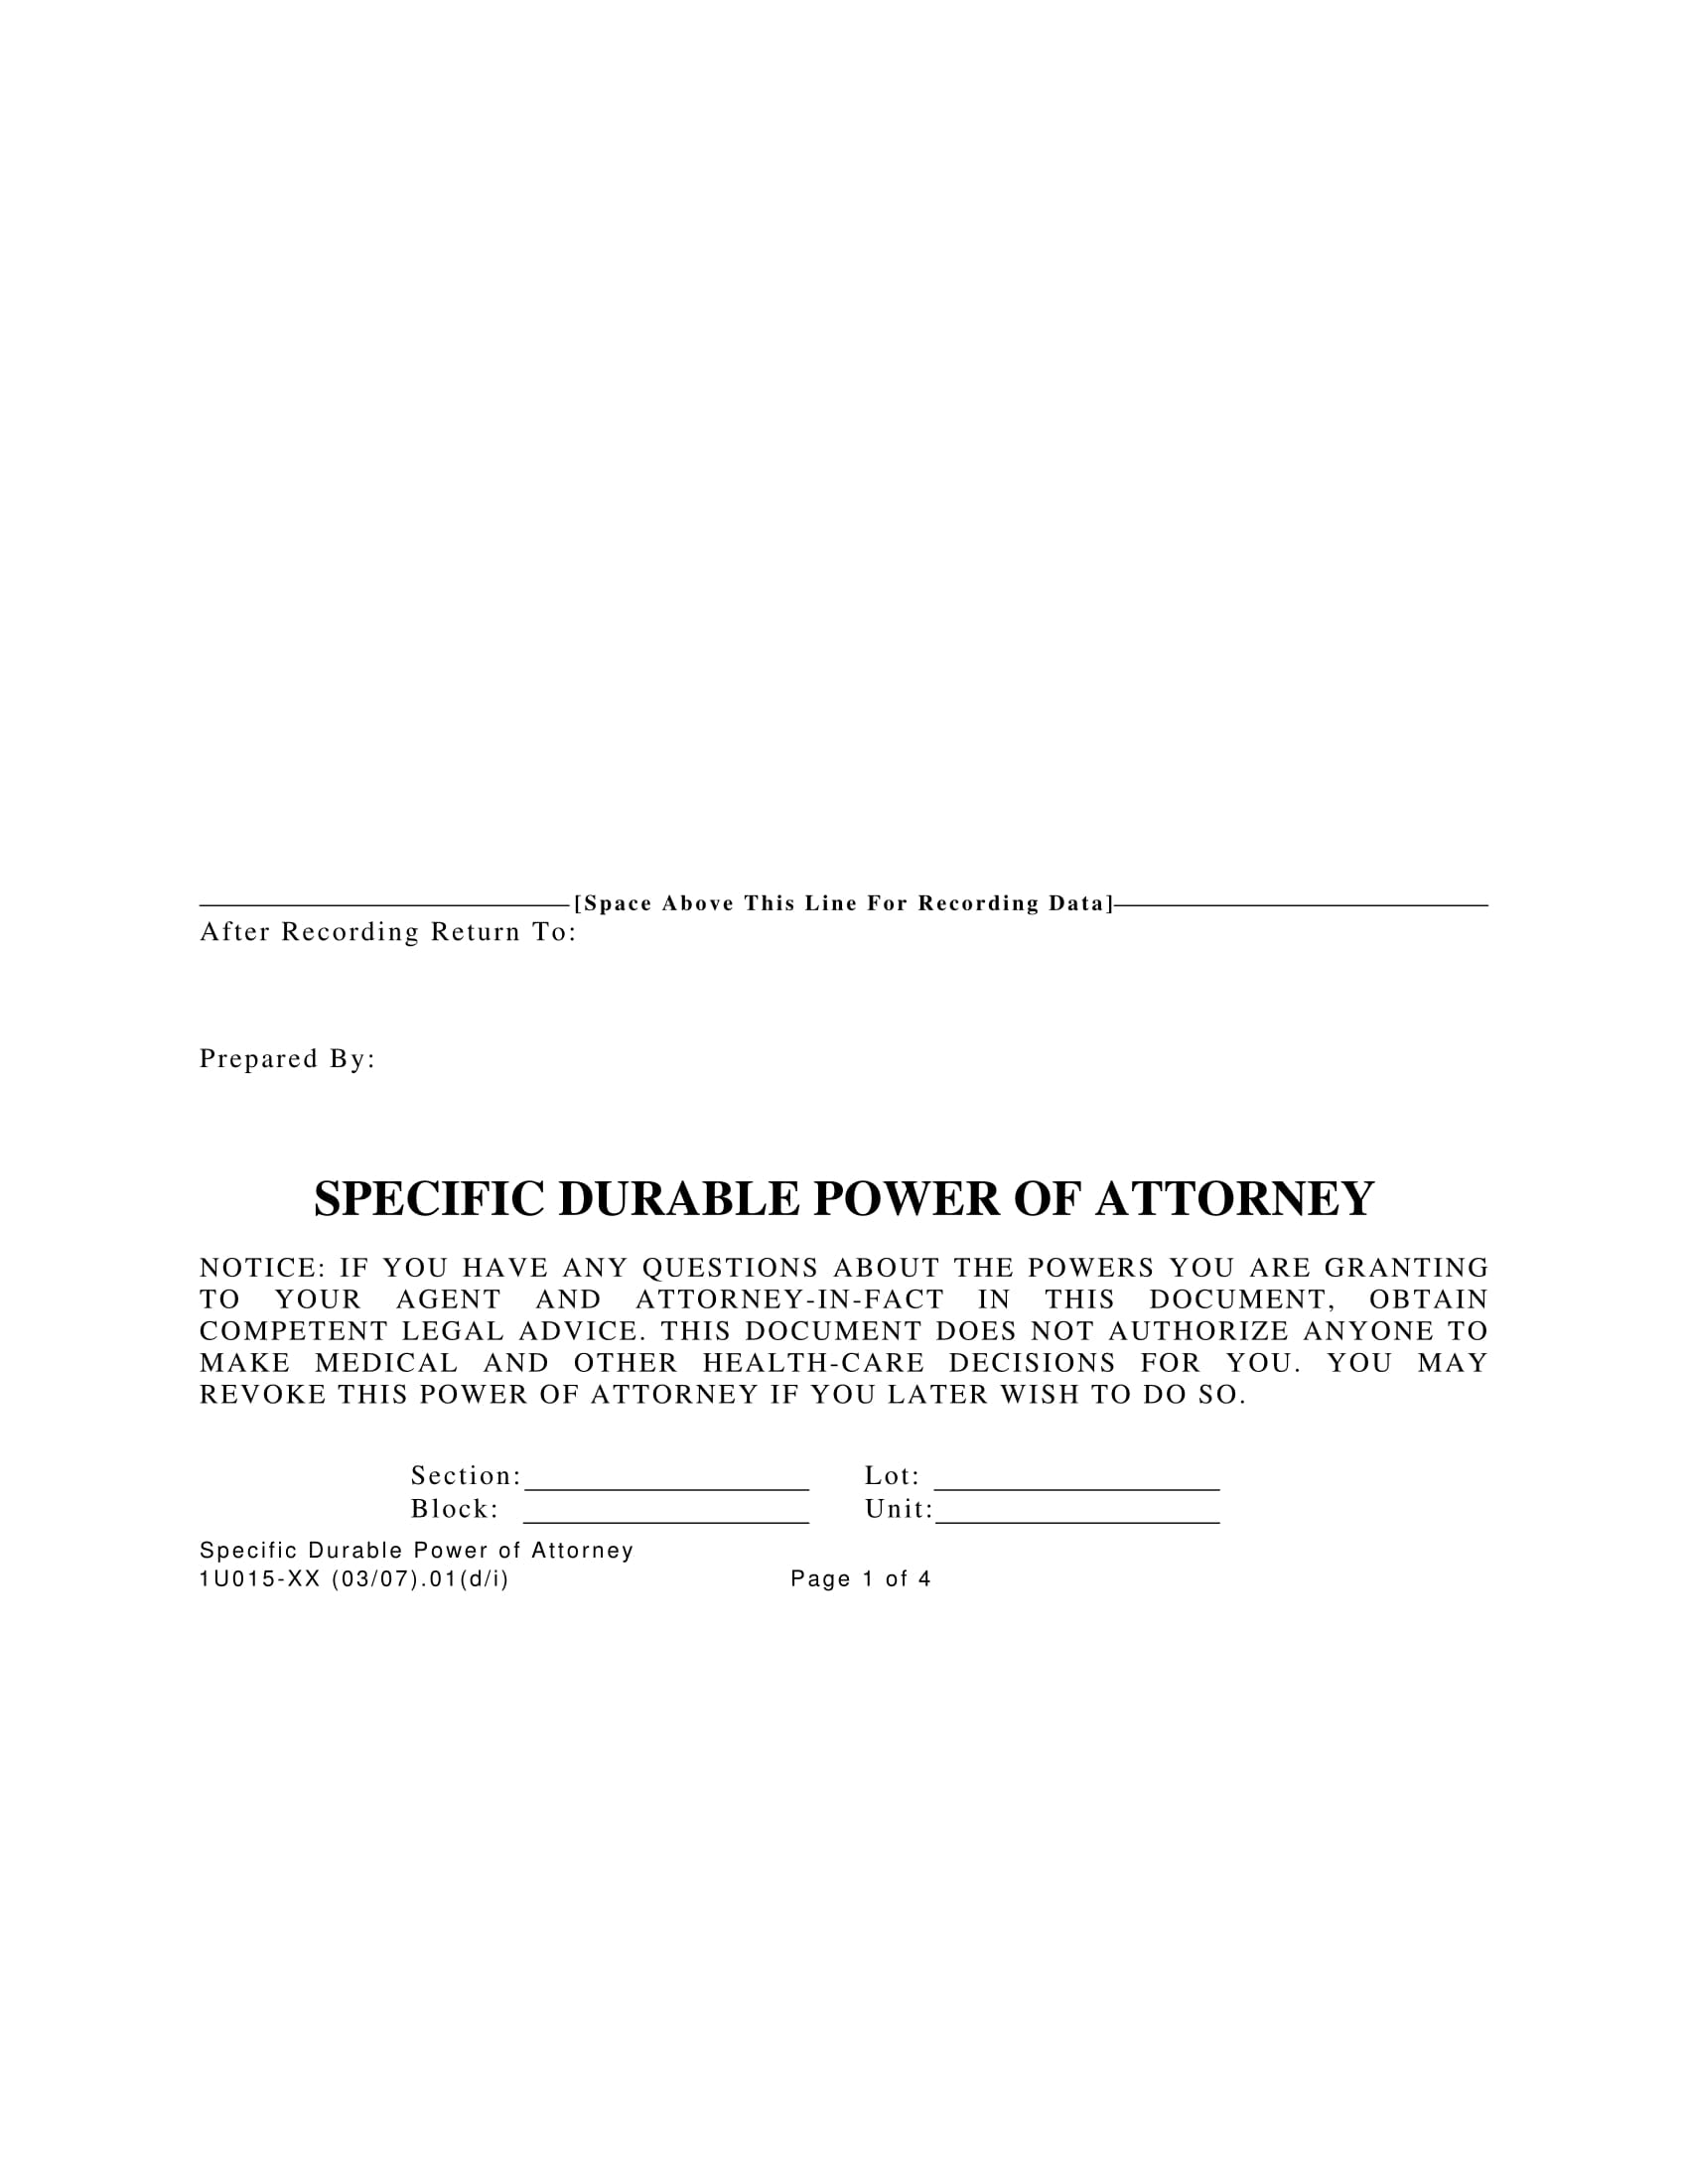 specific durable power of attorney 1